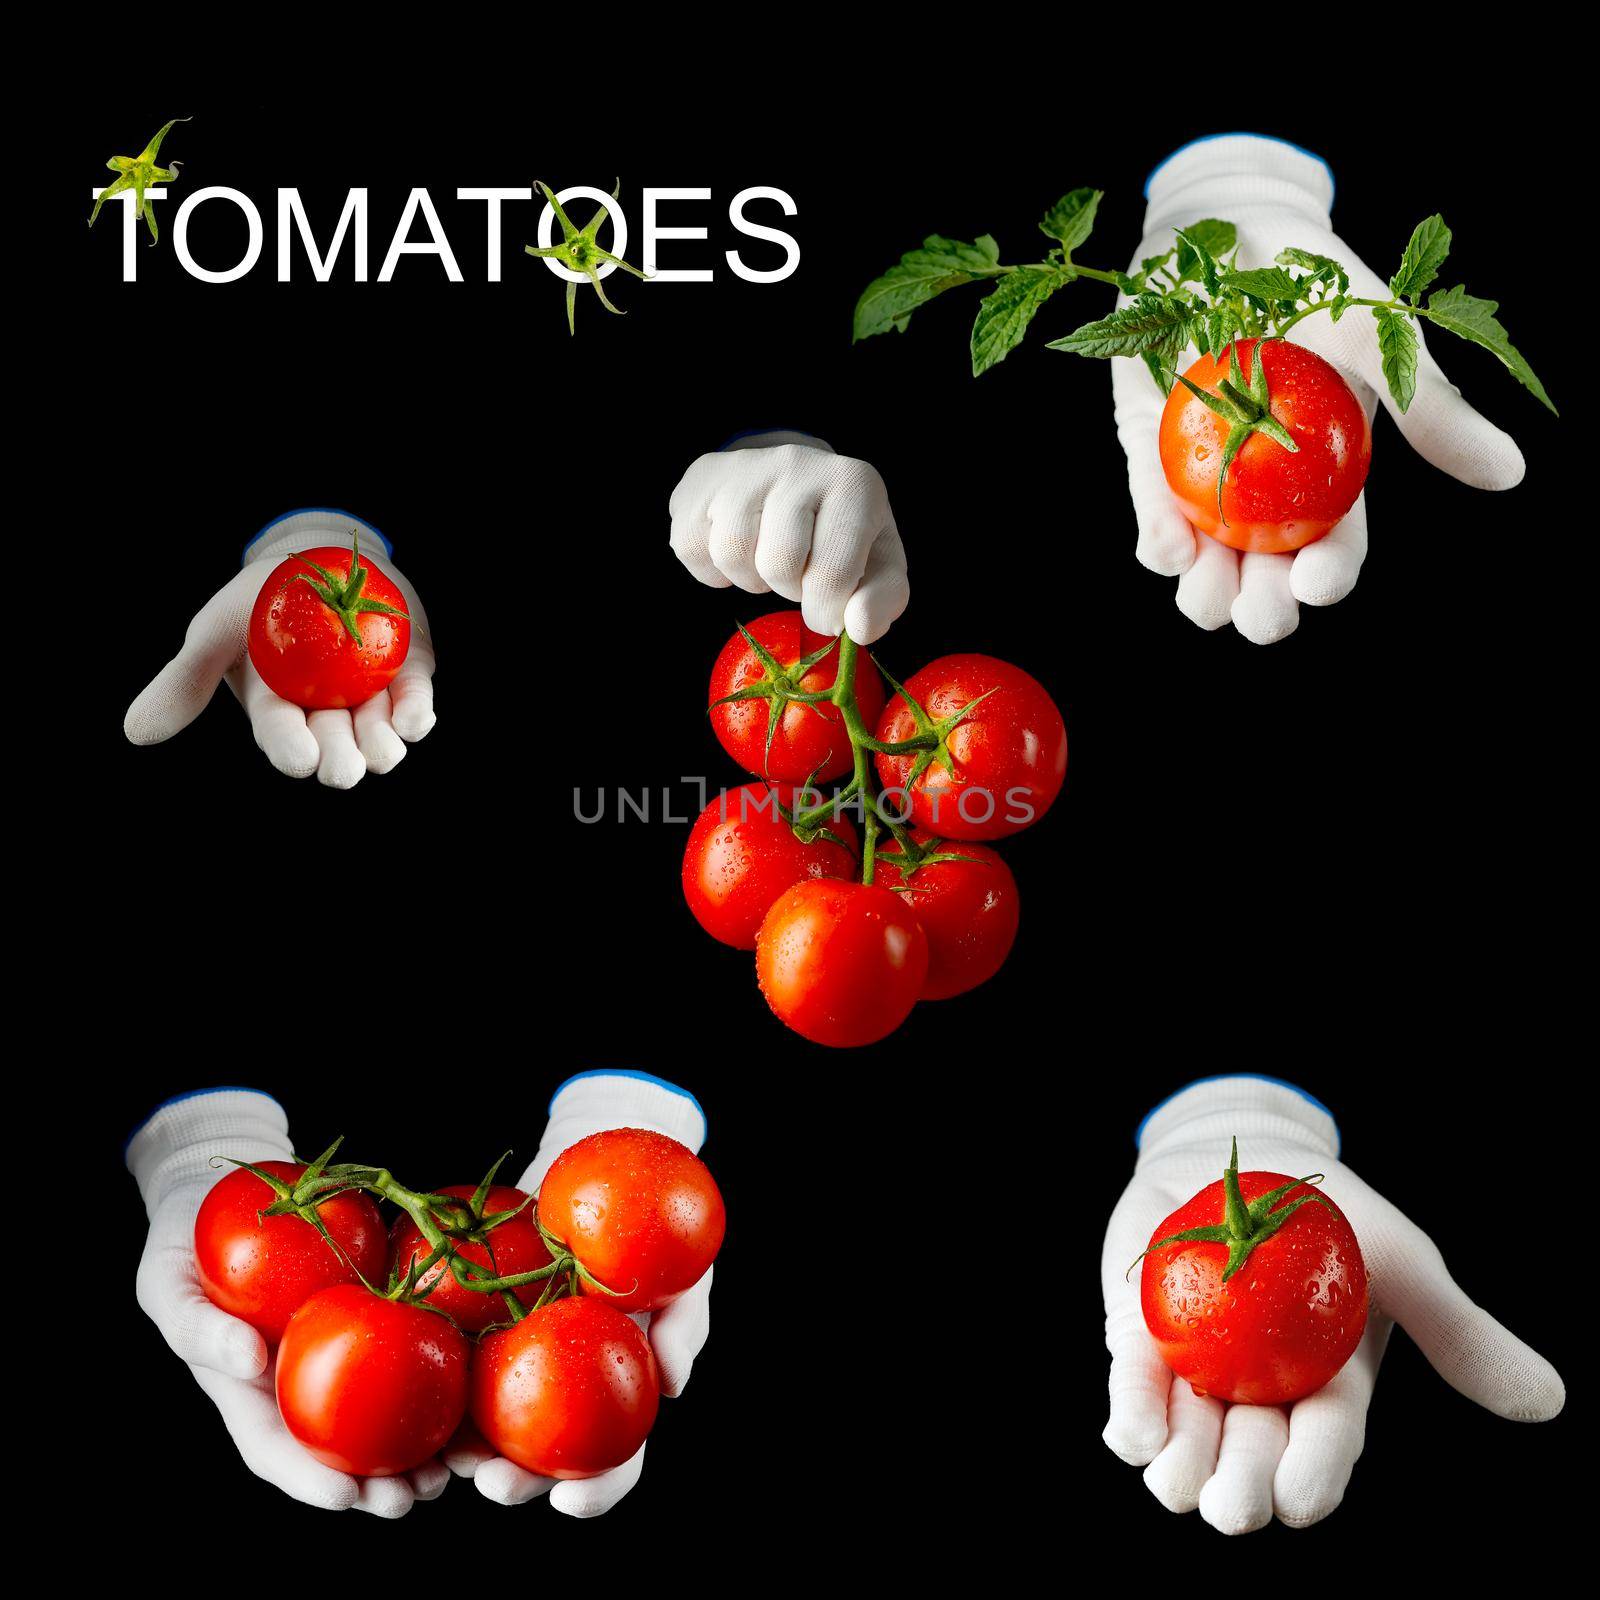 Fine fresh red tomatoes held by a hand in white glove on black background by PhotoTime